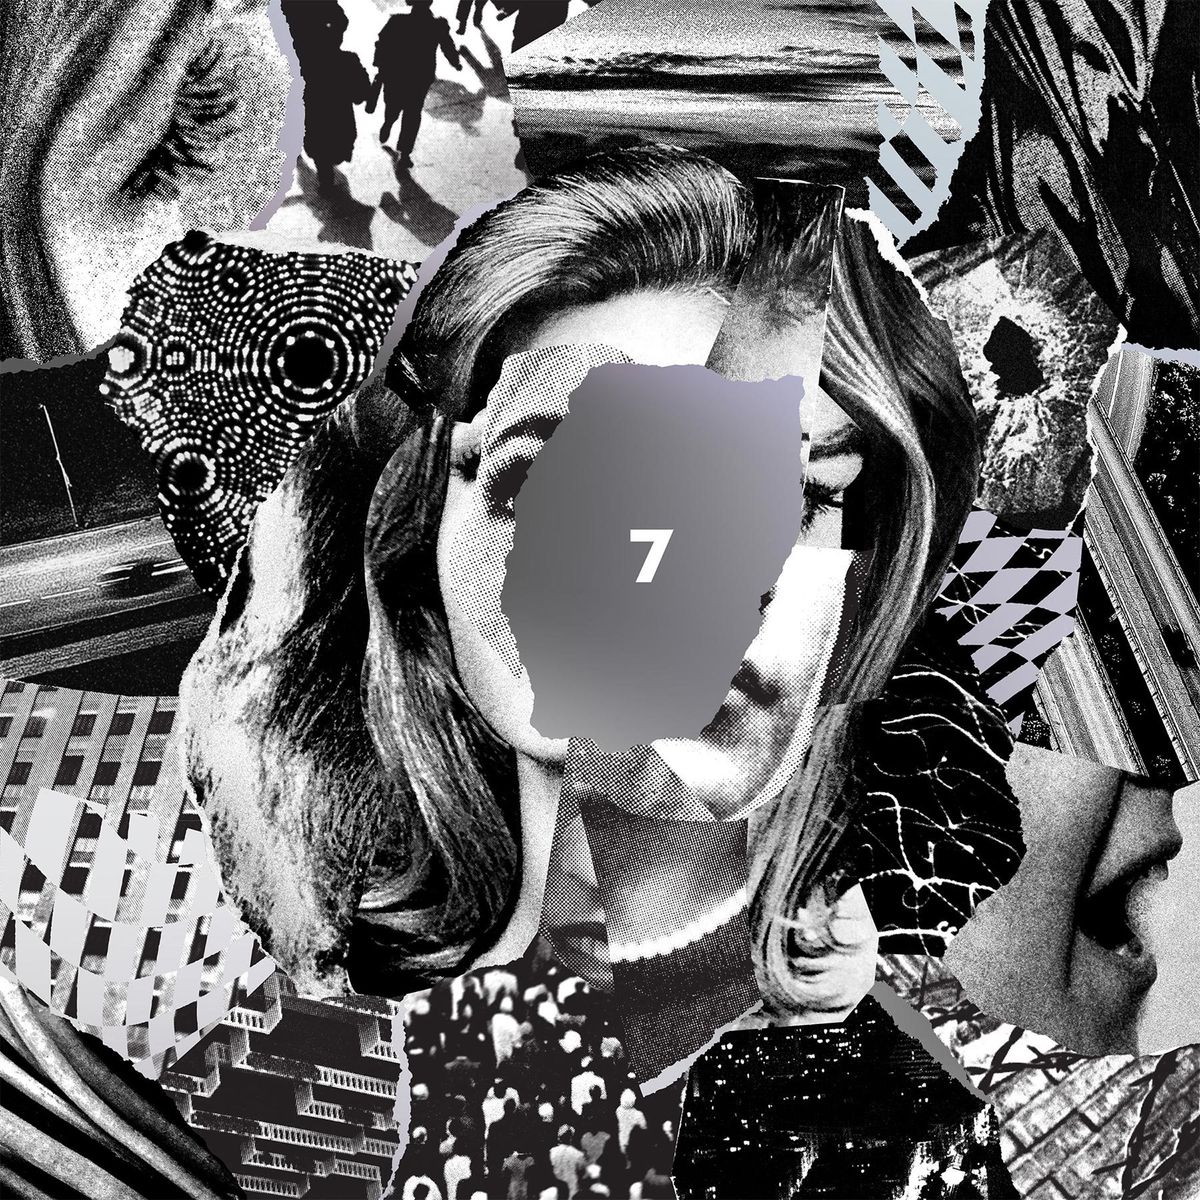 The Album Of The Year Is "7" By Beach House